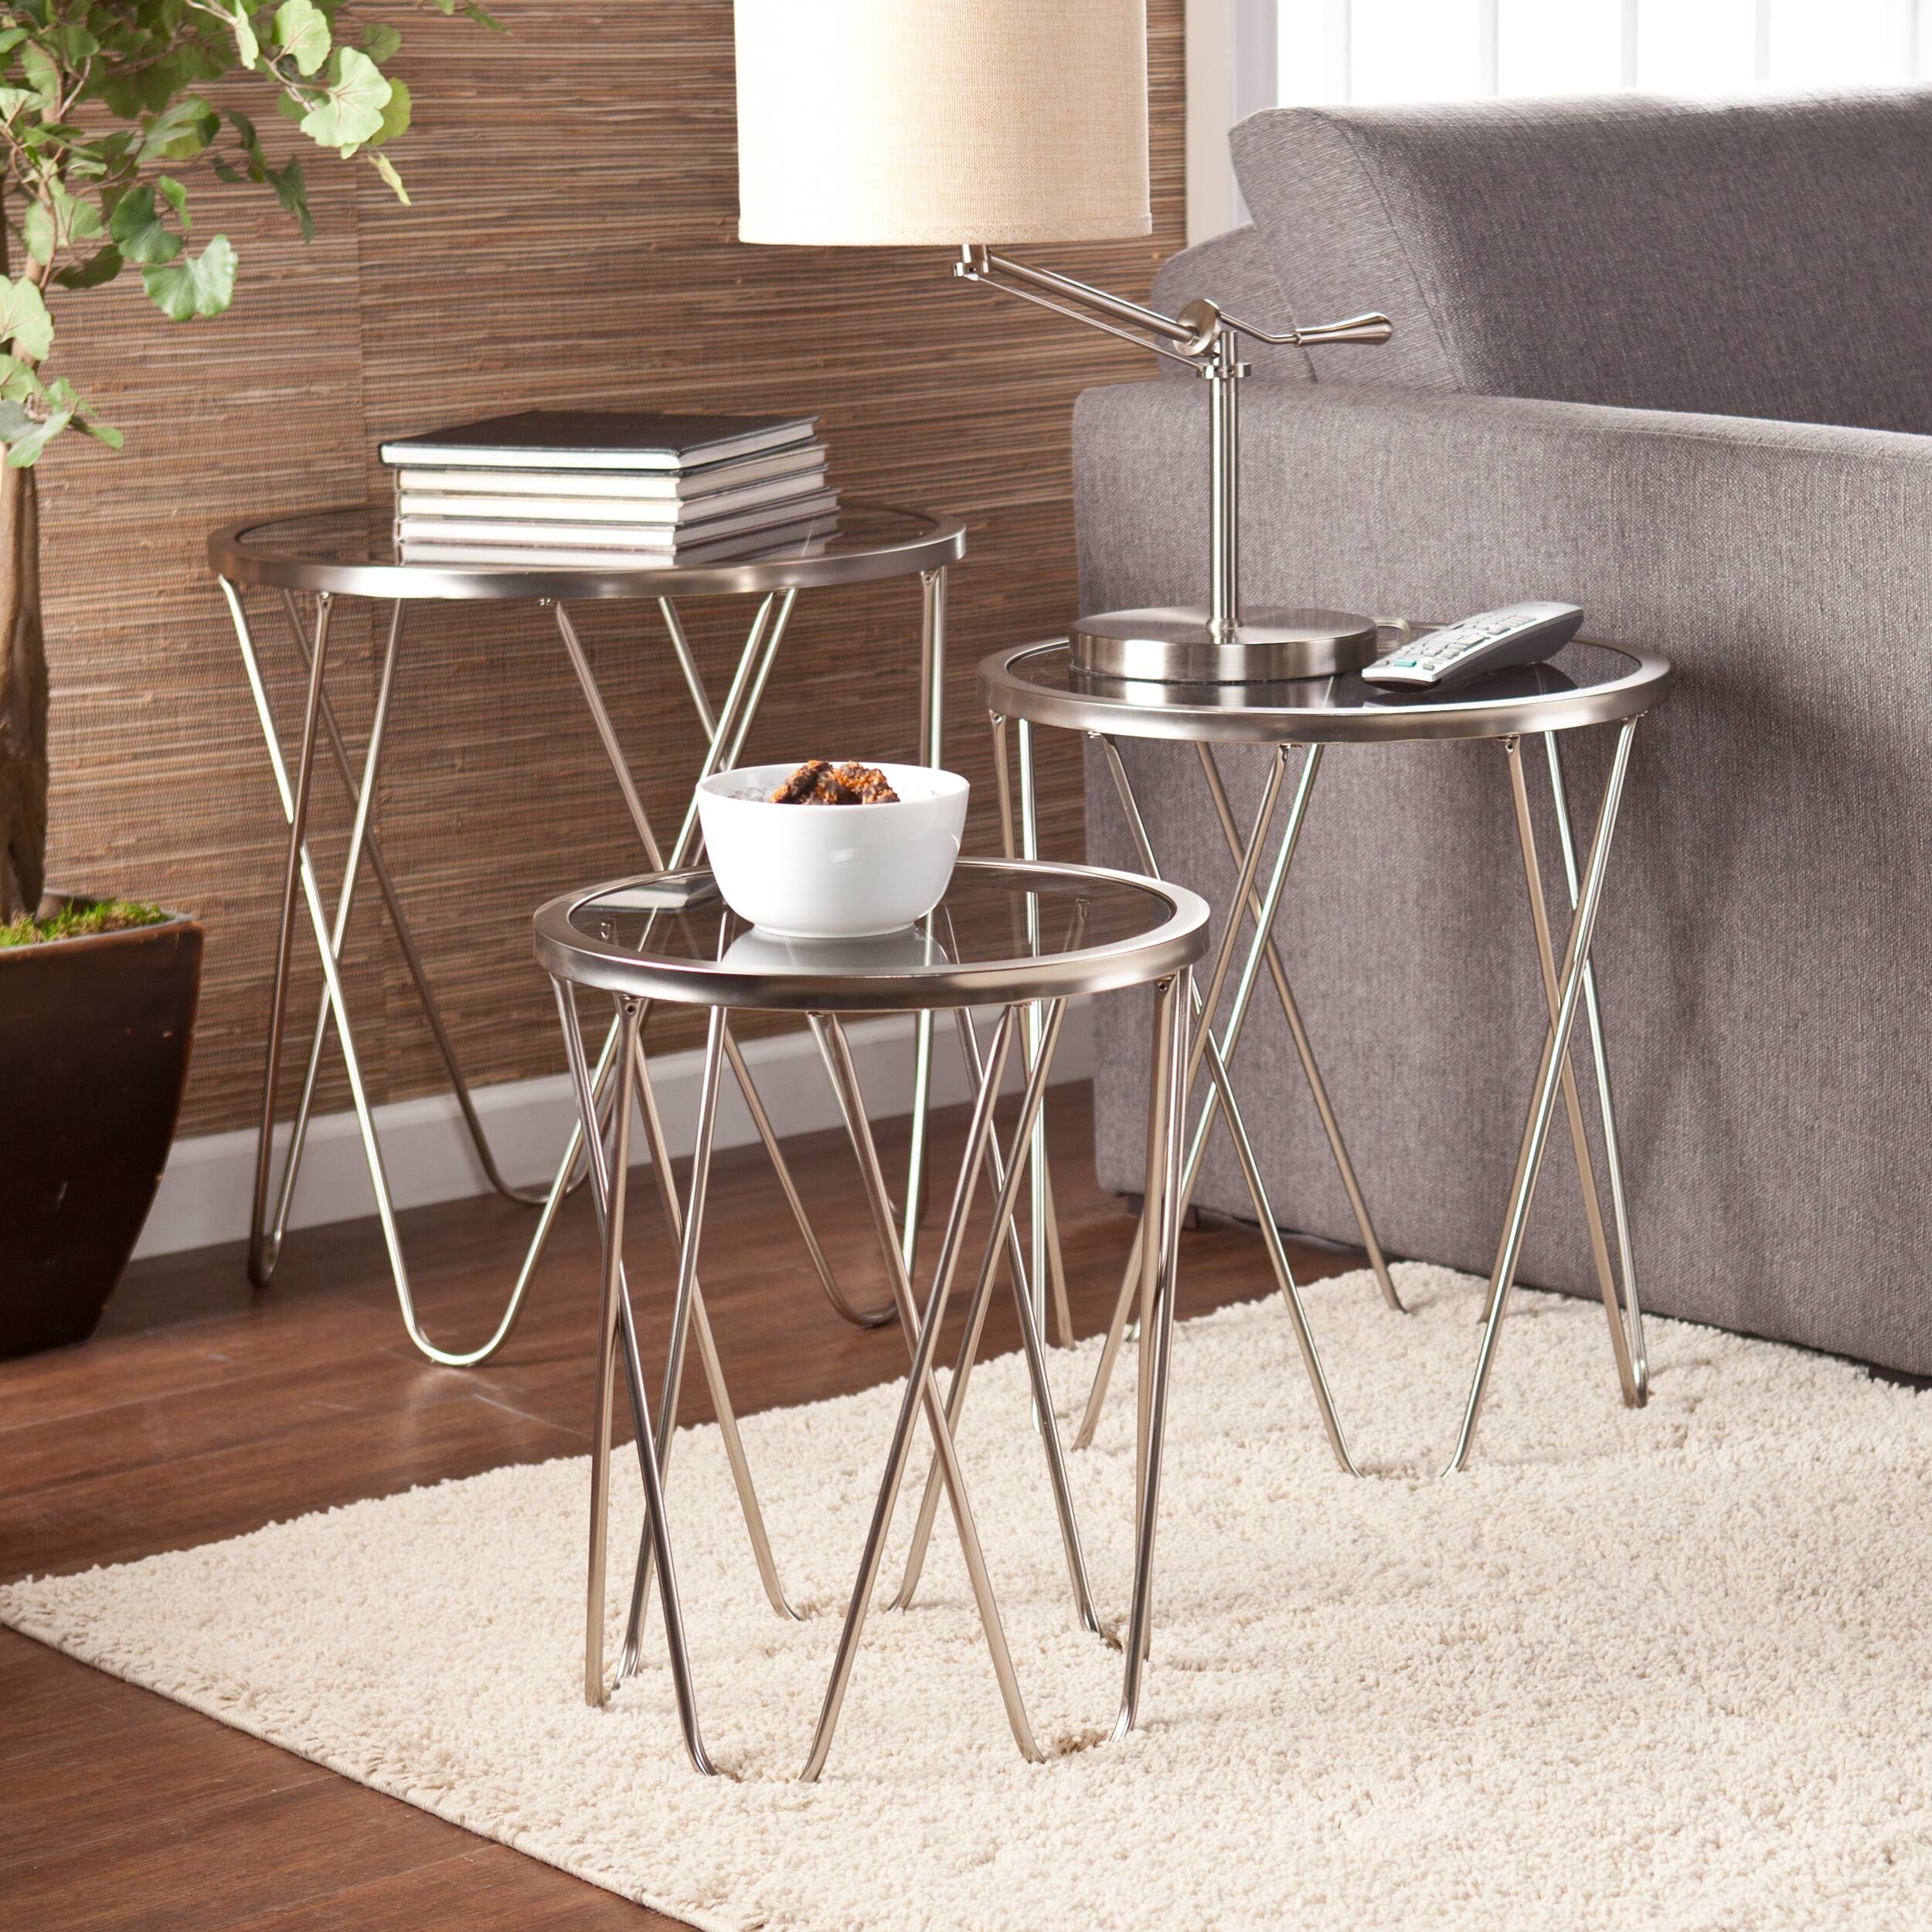 Upton home danica brushed silver nesting table 3 piece set